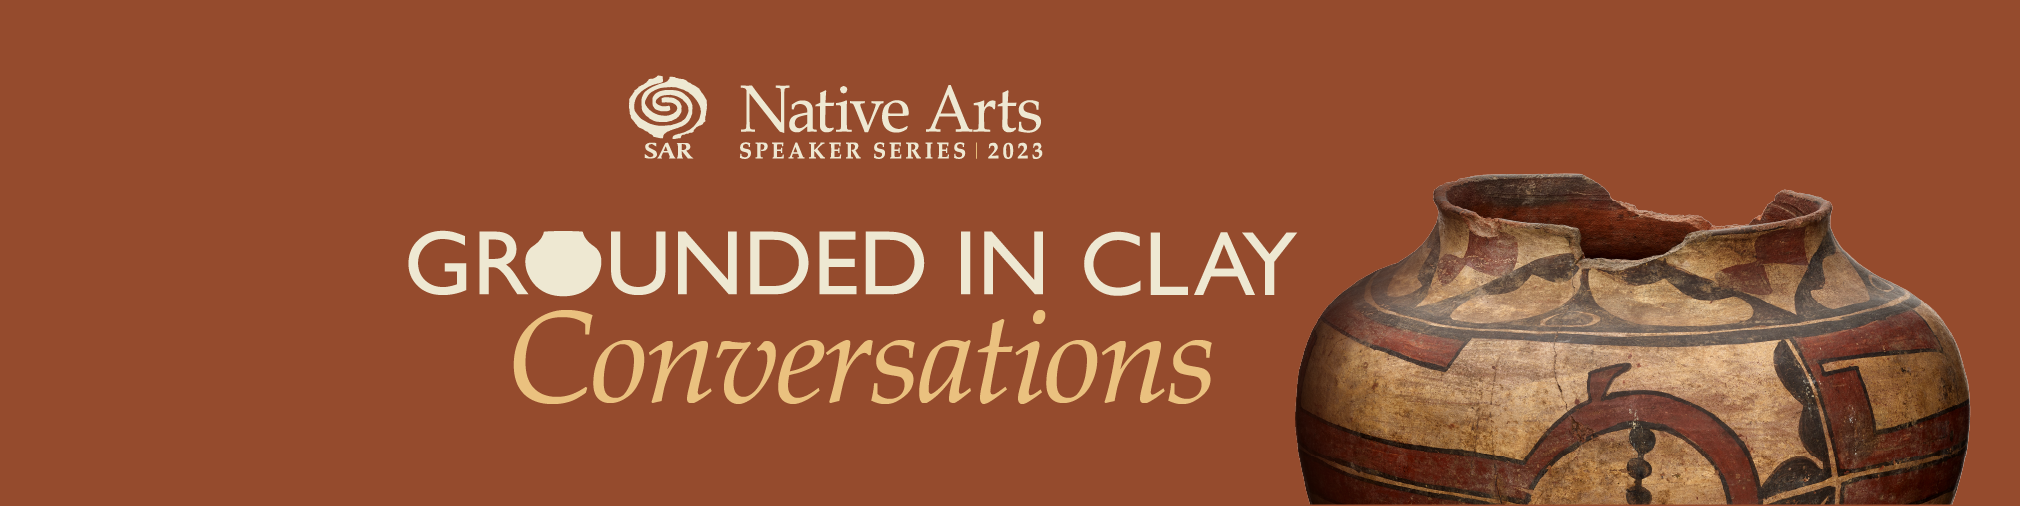 Native Arts Speaker Series 2023. Grounded in Clay Conversations